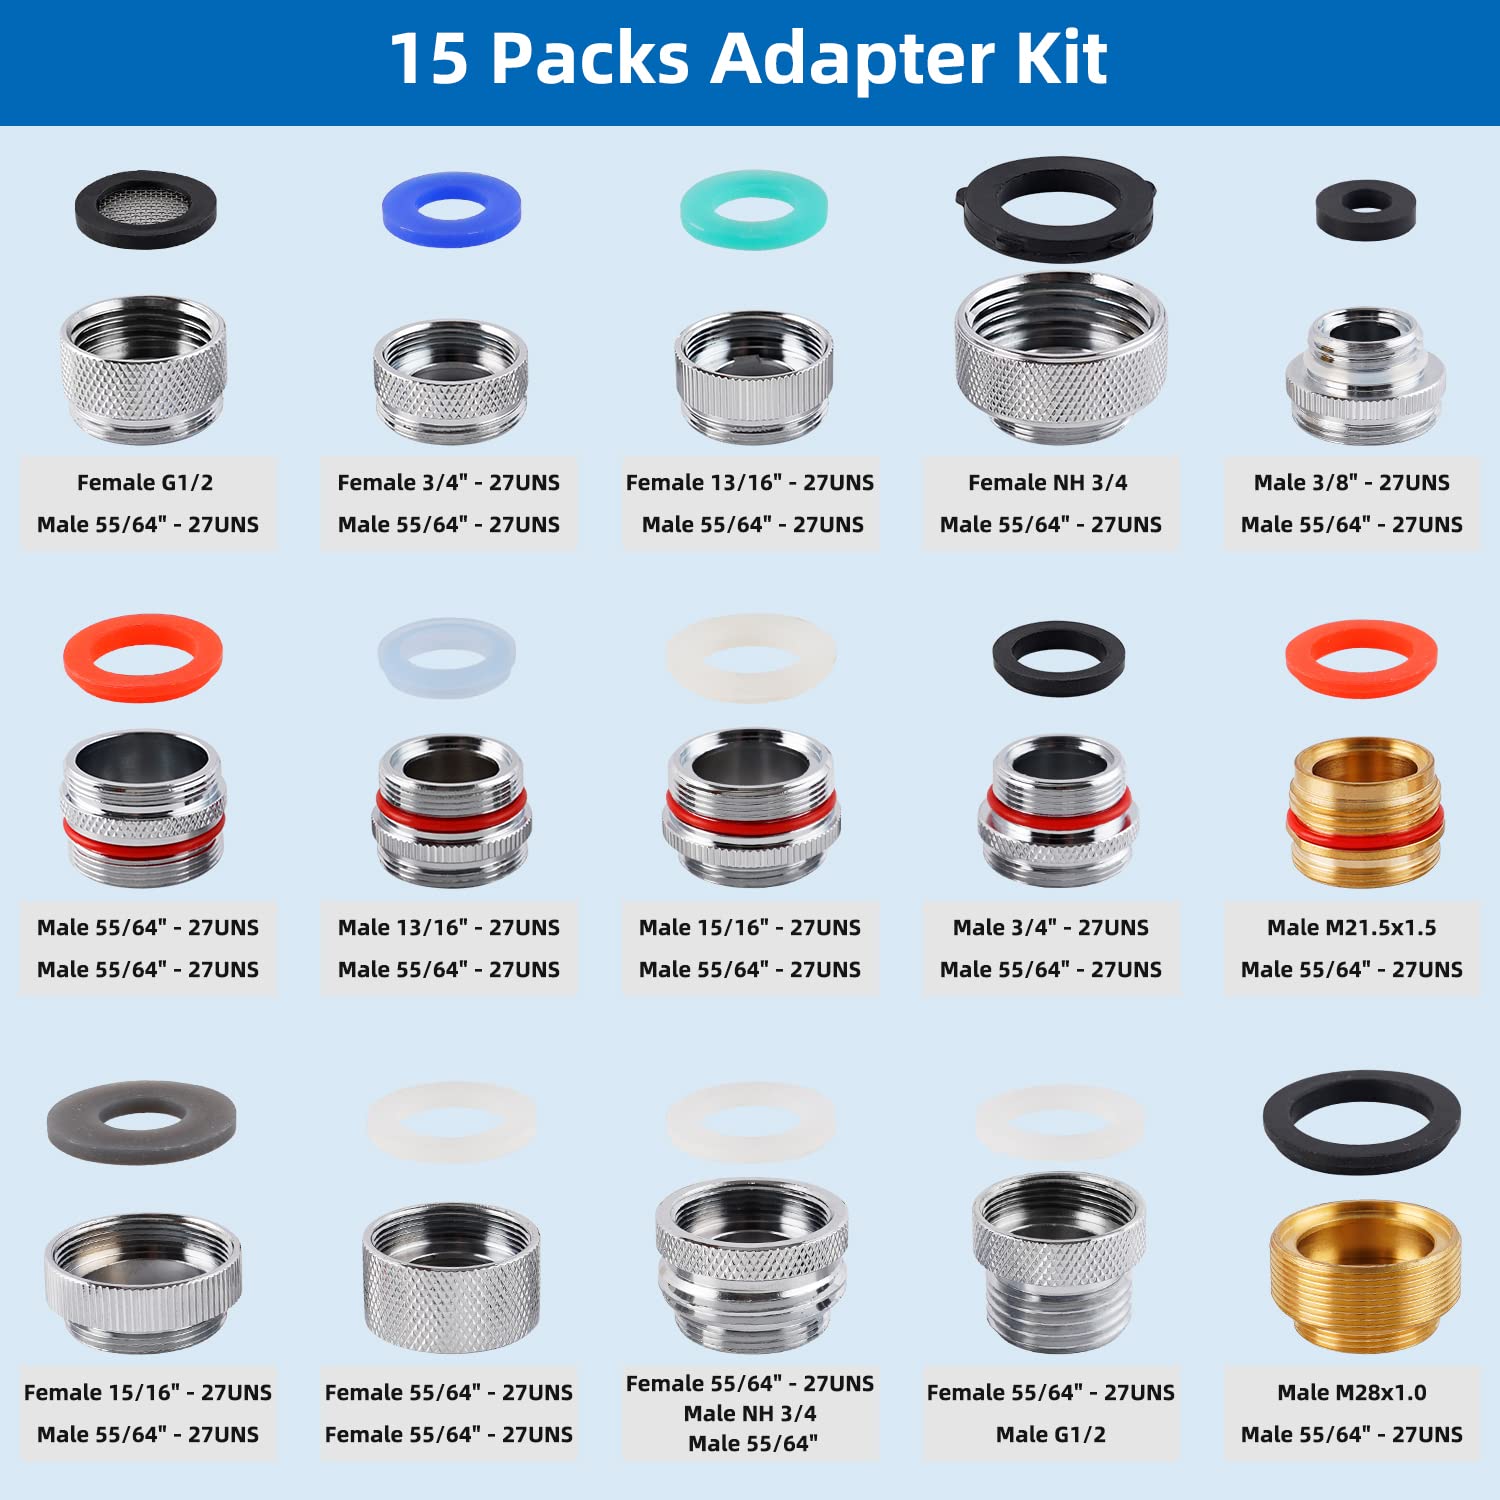 15pcs Faucet Adapter Kit, Brass Faucet Aerator Adapter Set Male Female Kitchen Faucet Adapter Converter to Faucet Aerator, Garden Hose, Standard Hose in RV, Apply on Both Removable and Cache Aerator